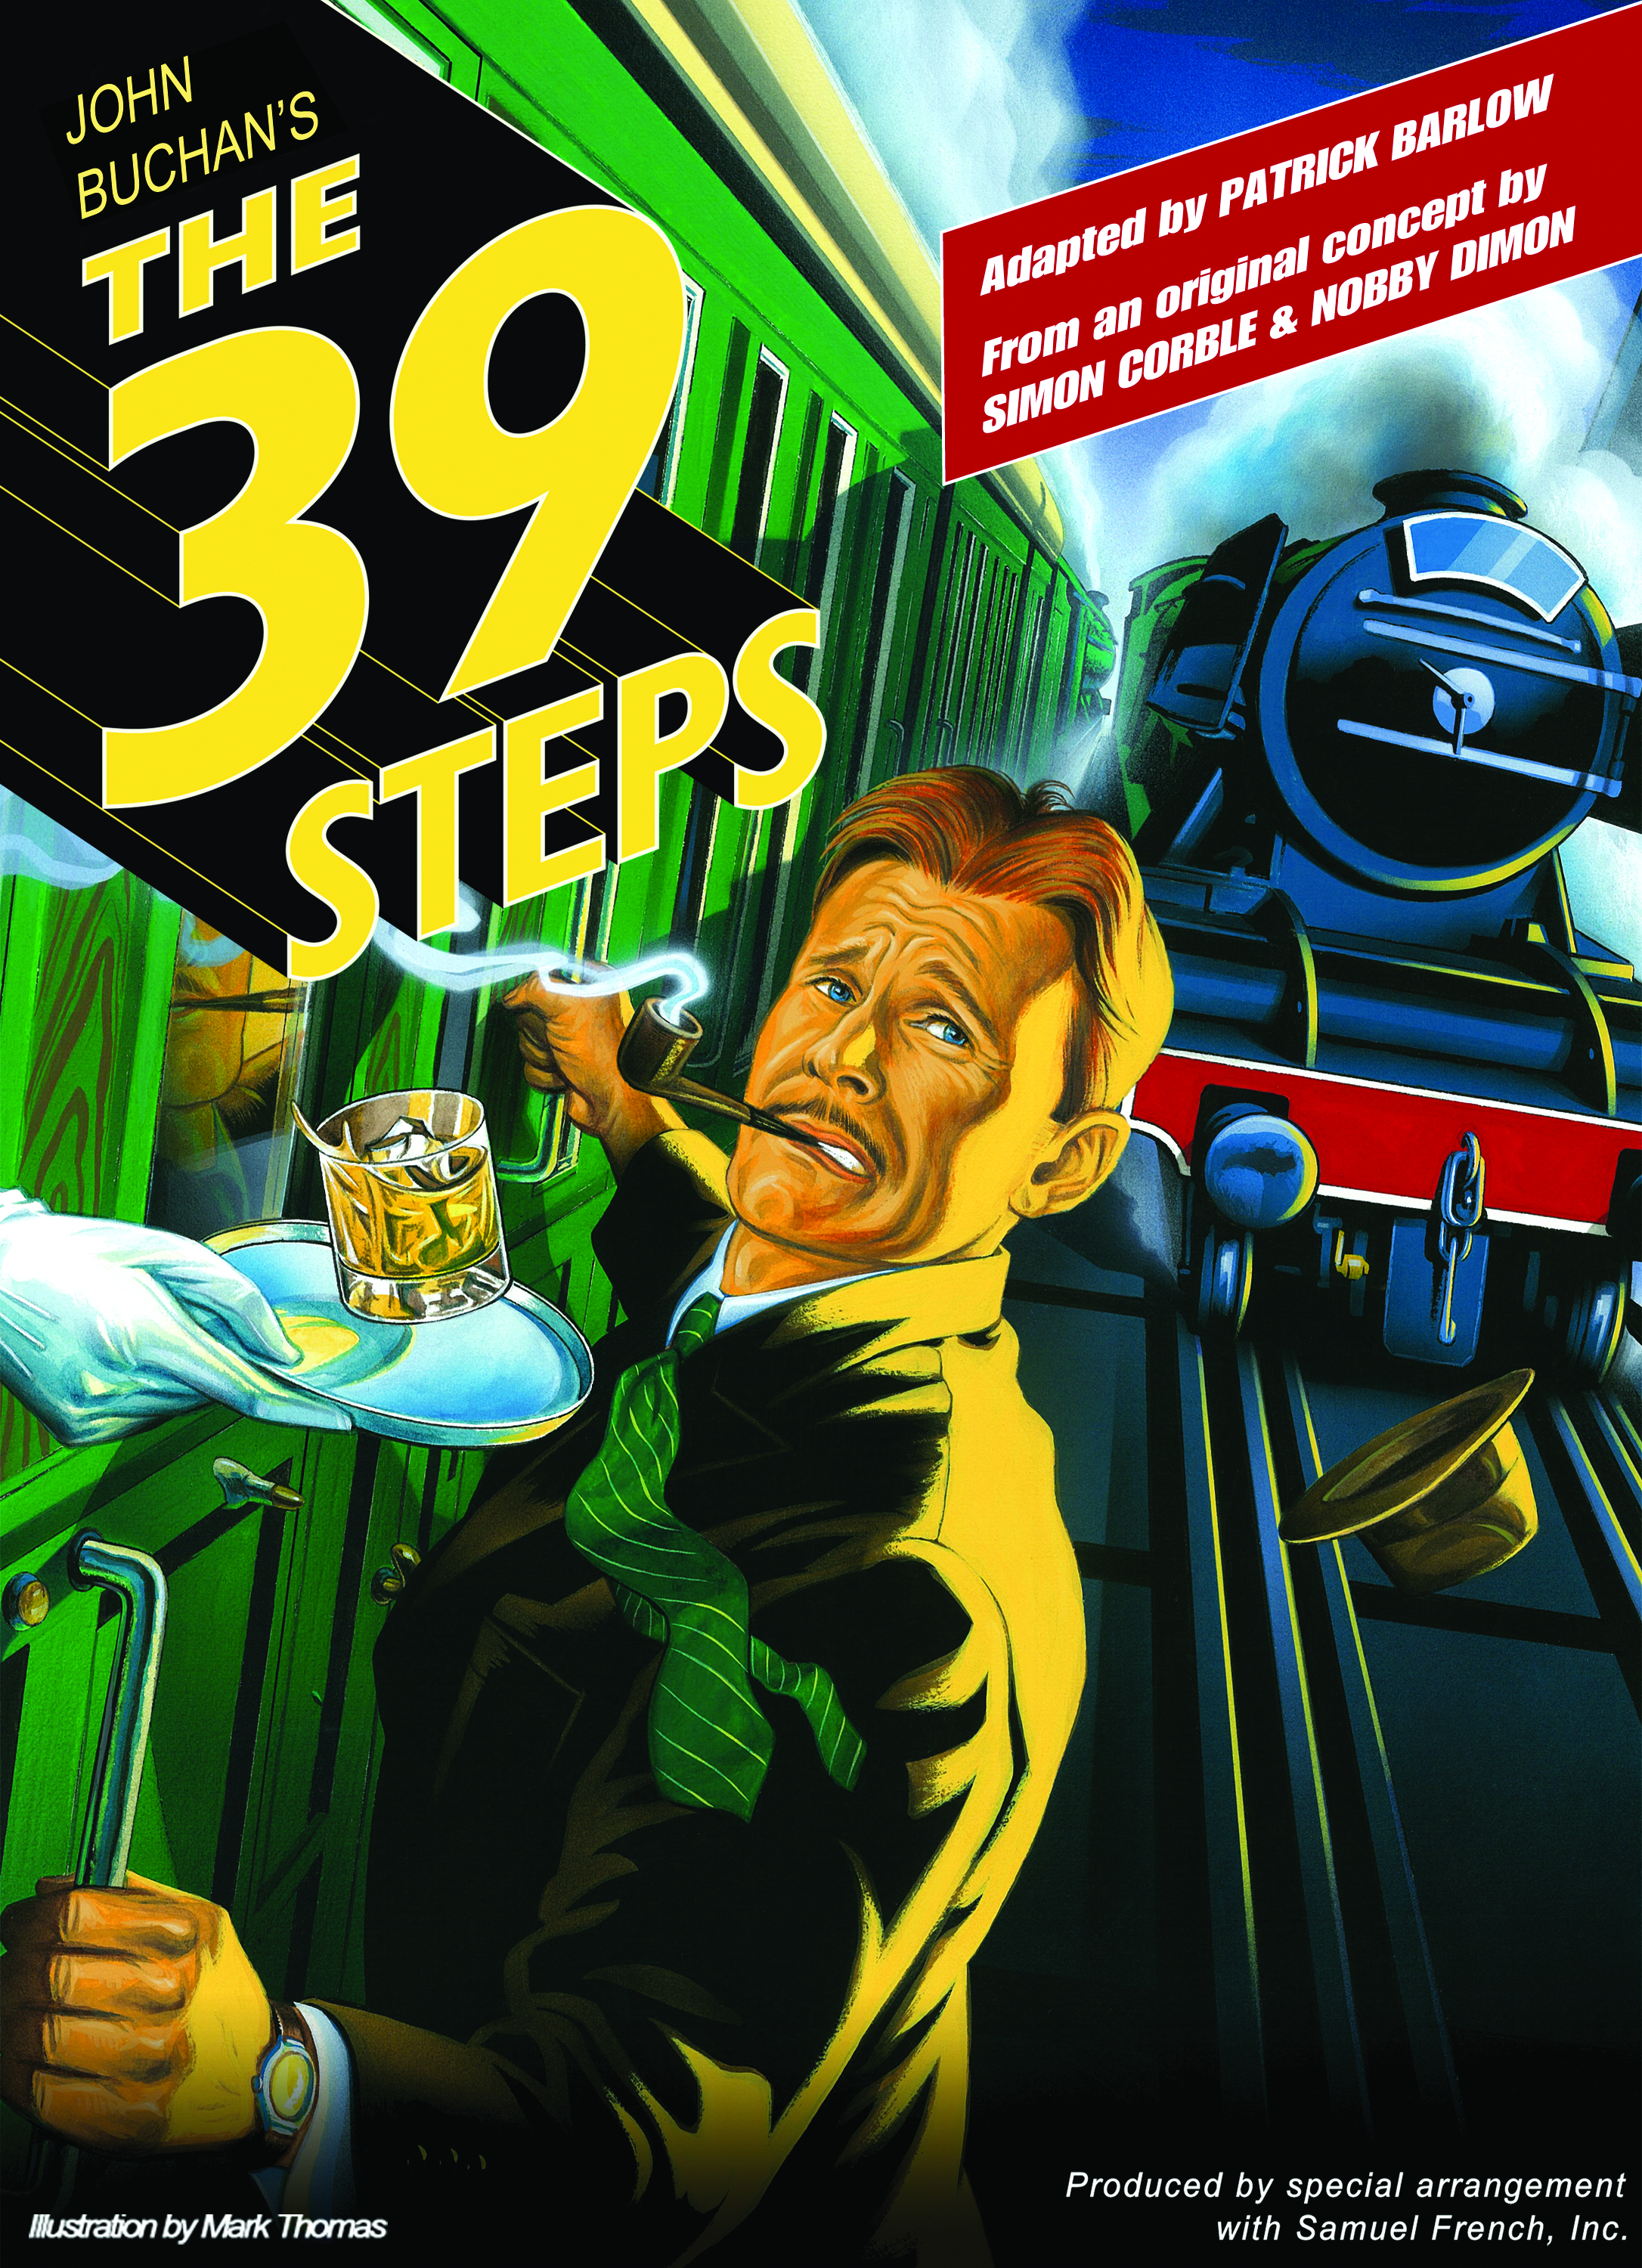 THE 39 STEPS - Colonial Theatre Shakespeare in the Park